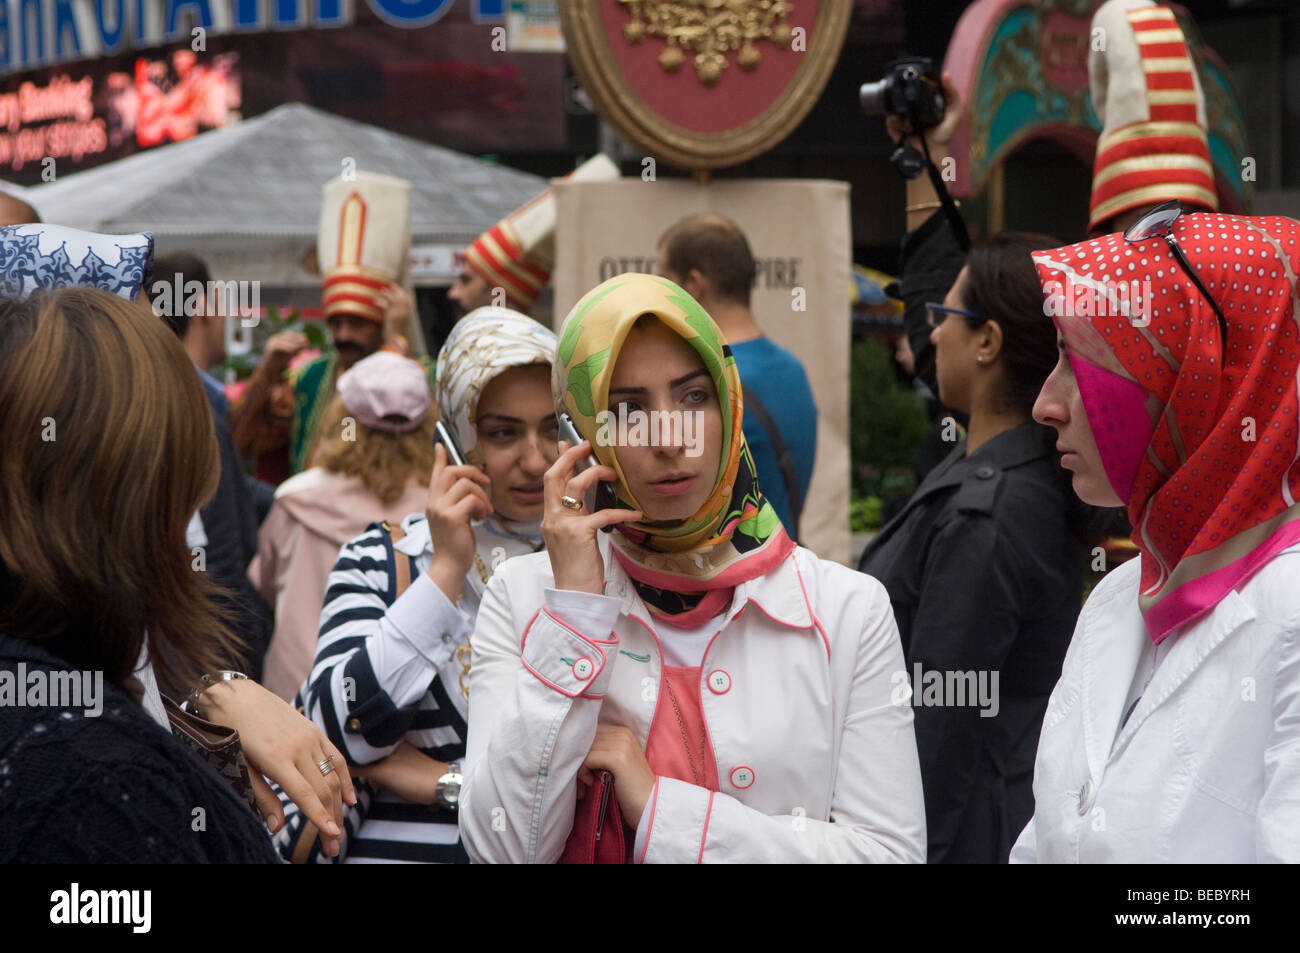 Women with headscarfs, some on their cell phones, at a Turkish Festival in New York Stock Photo